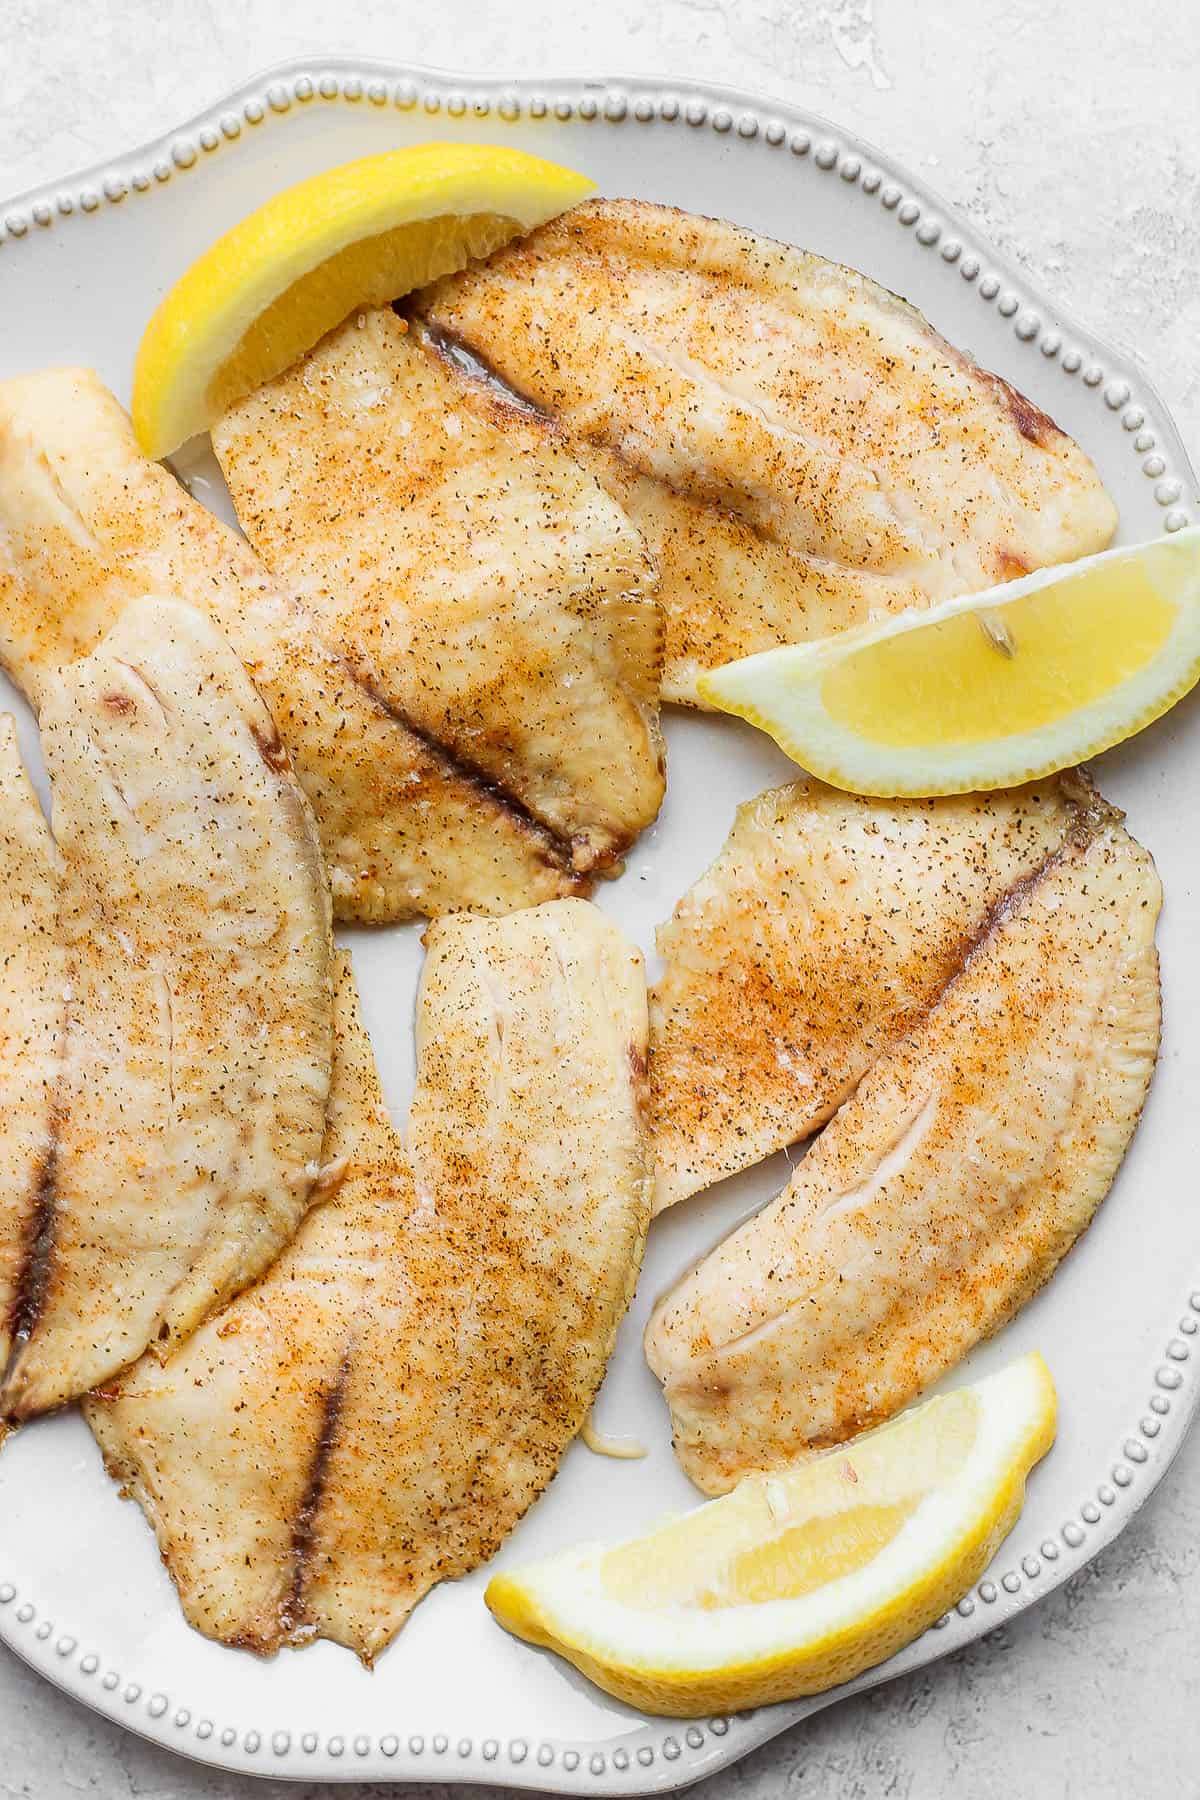 Baked tilapia fillets on a plate with lemon wedges.